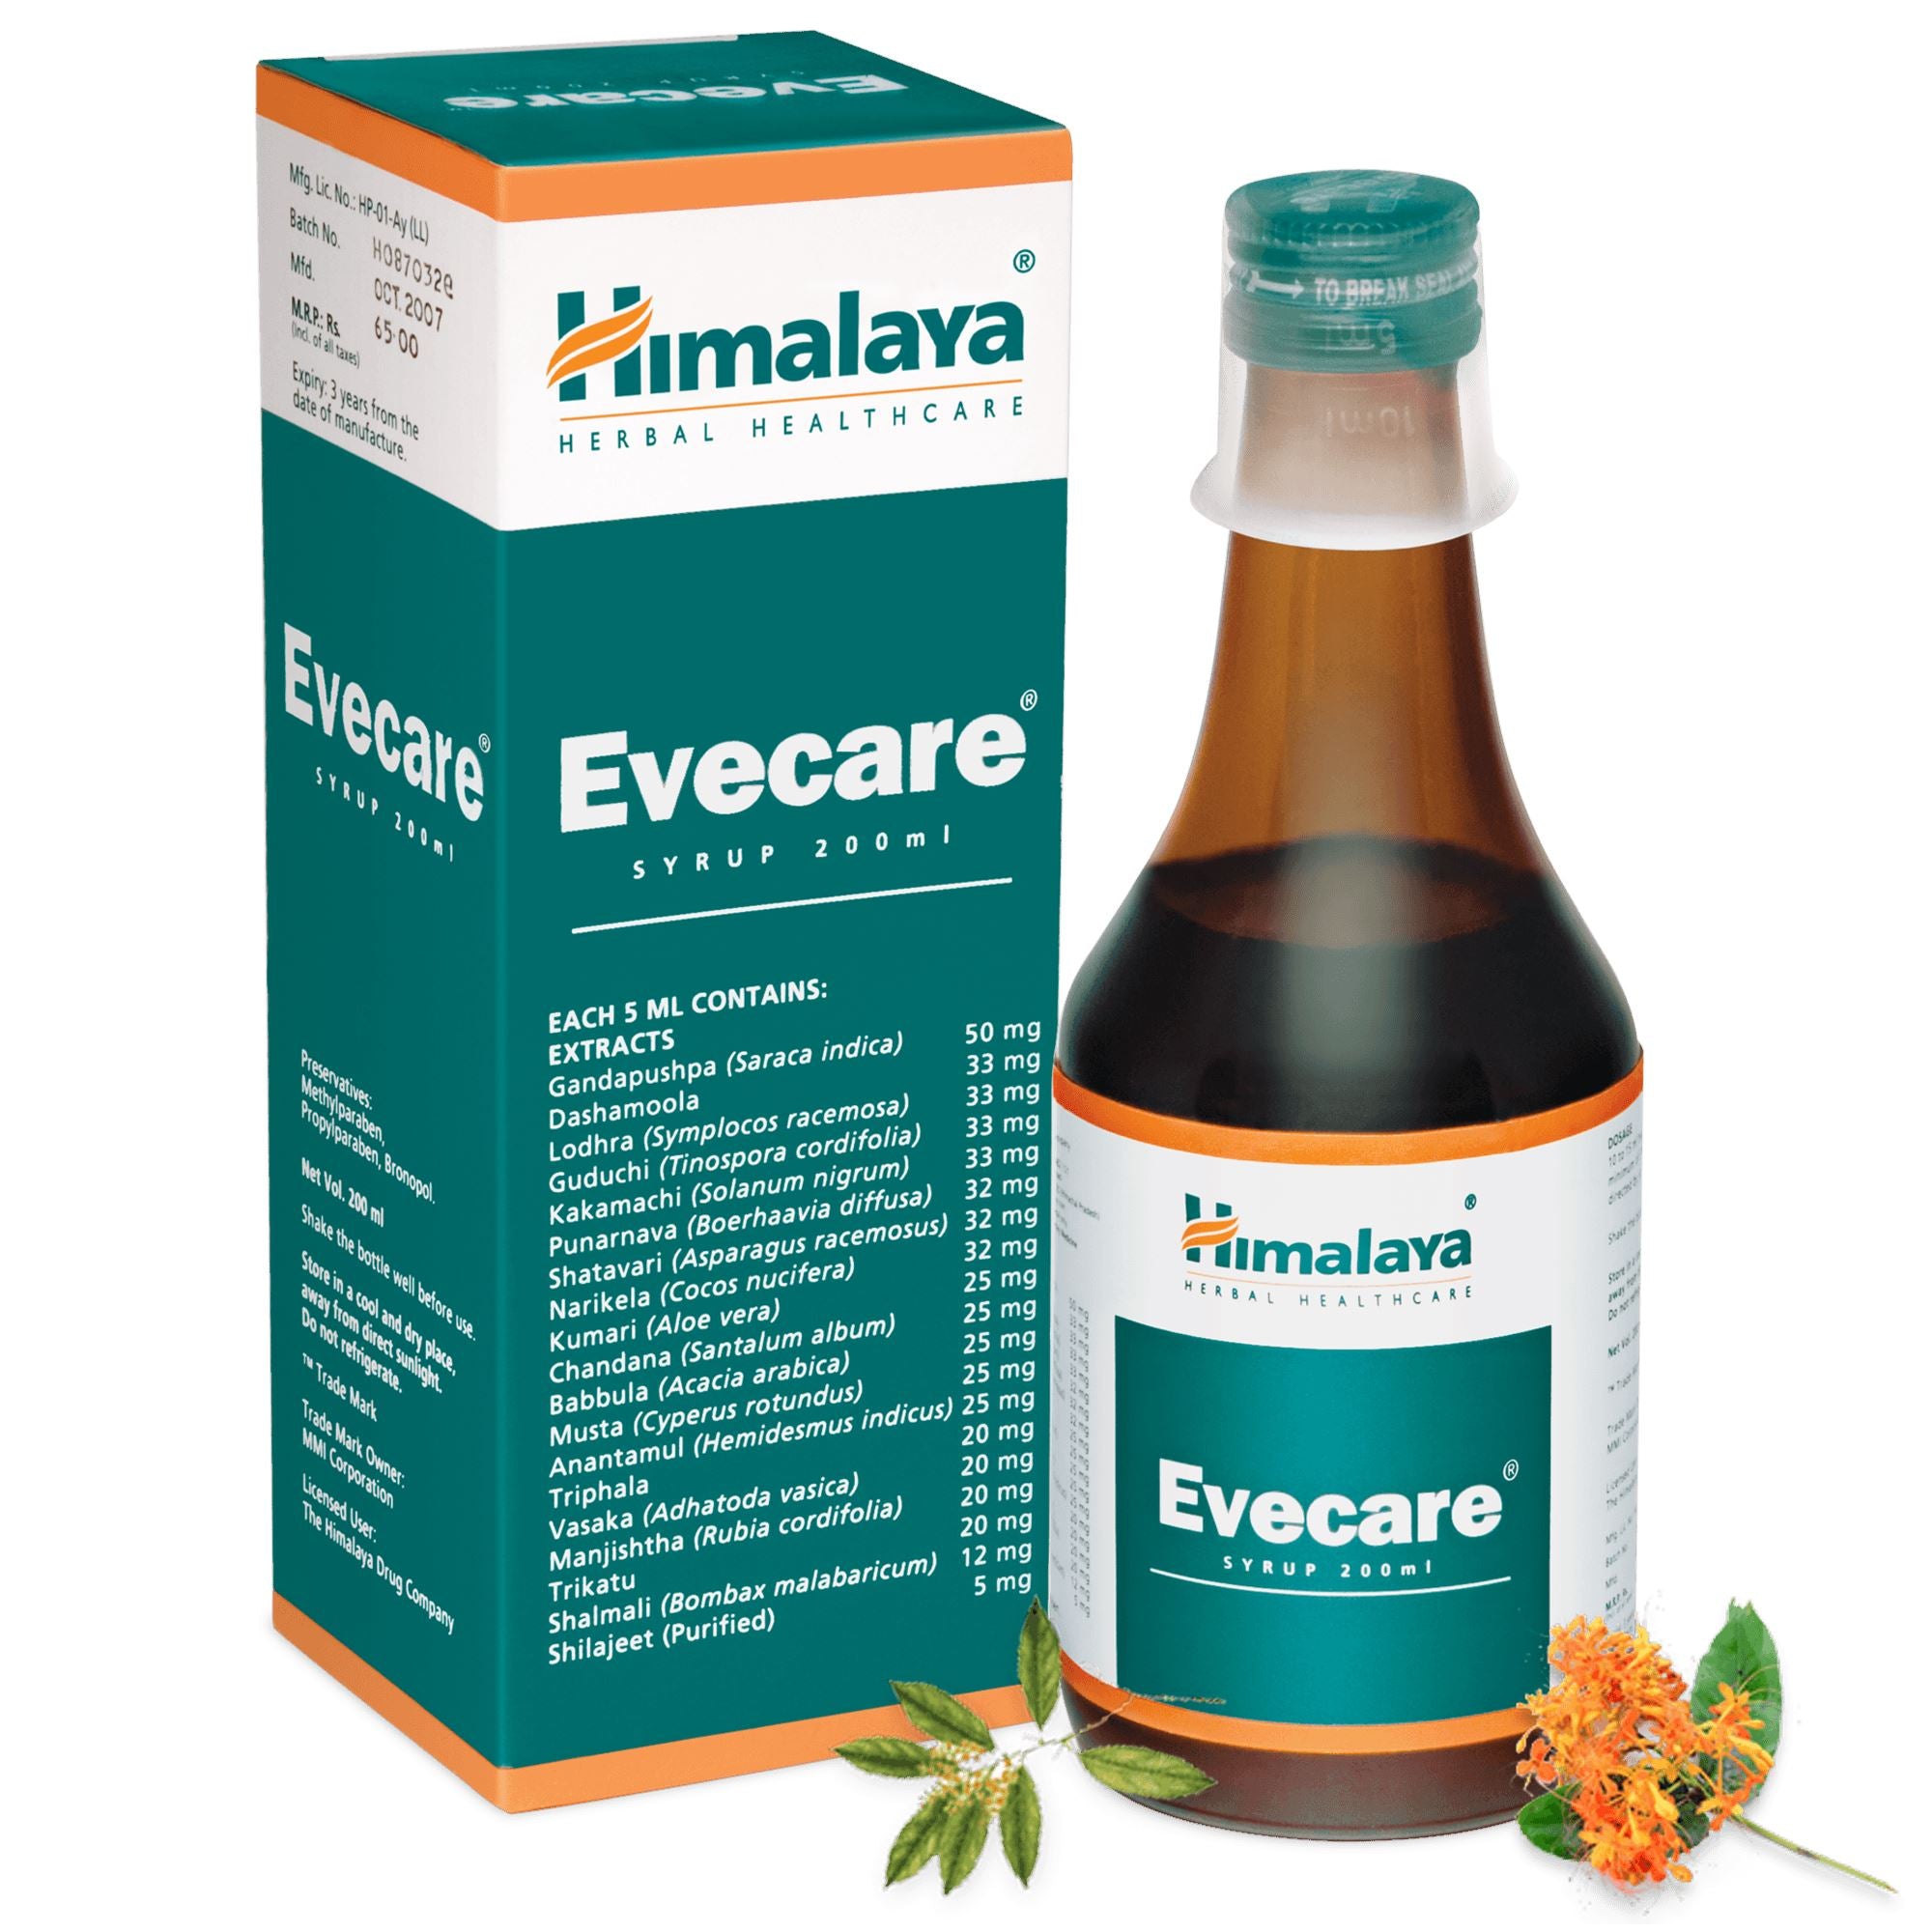 Himalaya Evecare Syrup - Syrup to promotes women's sexual health